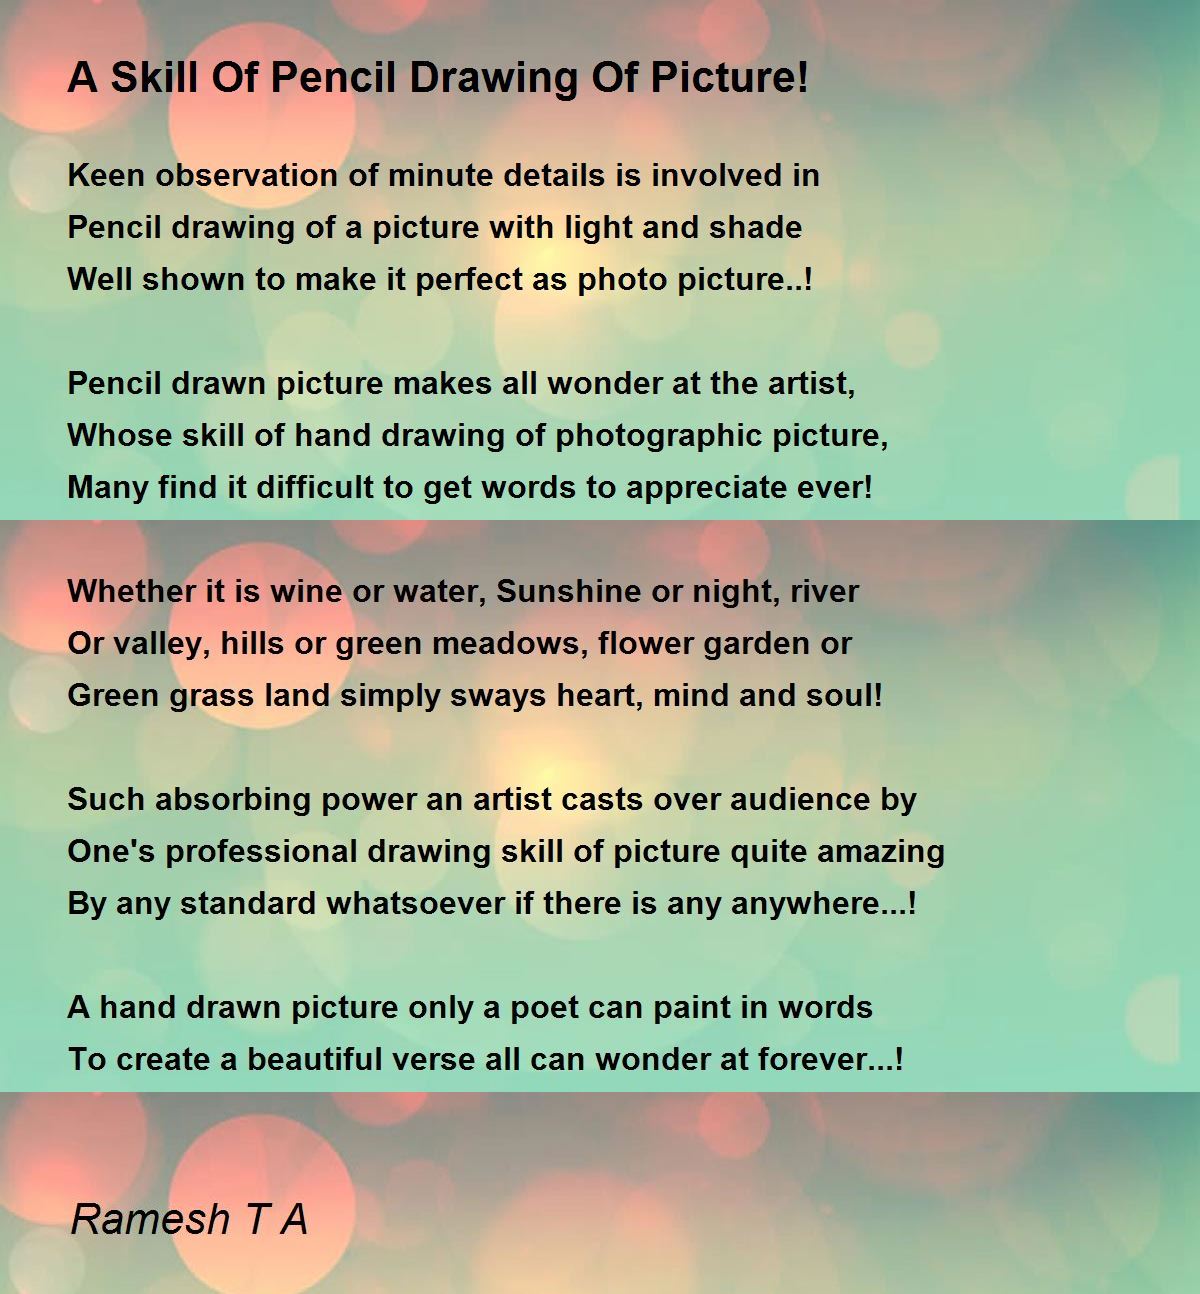 A Skill Of Pencil Drawing Of Picture By Ramesh T A A Skill Of Pencil Drawing Of Picture Poem